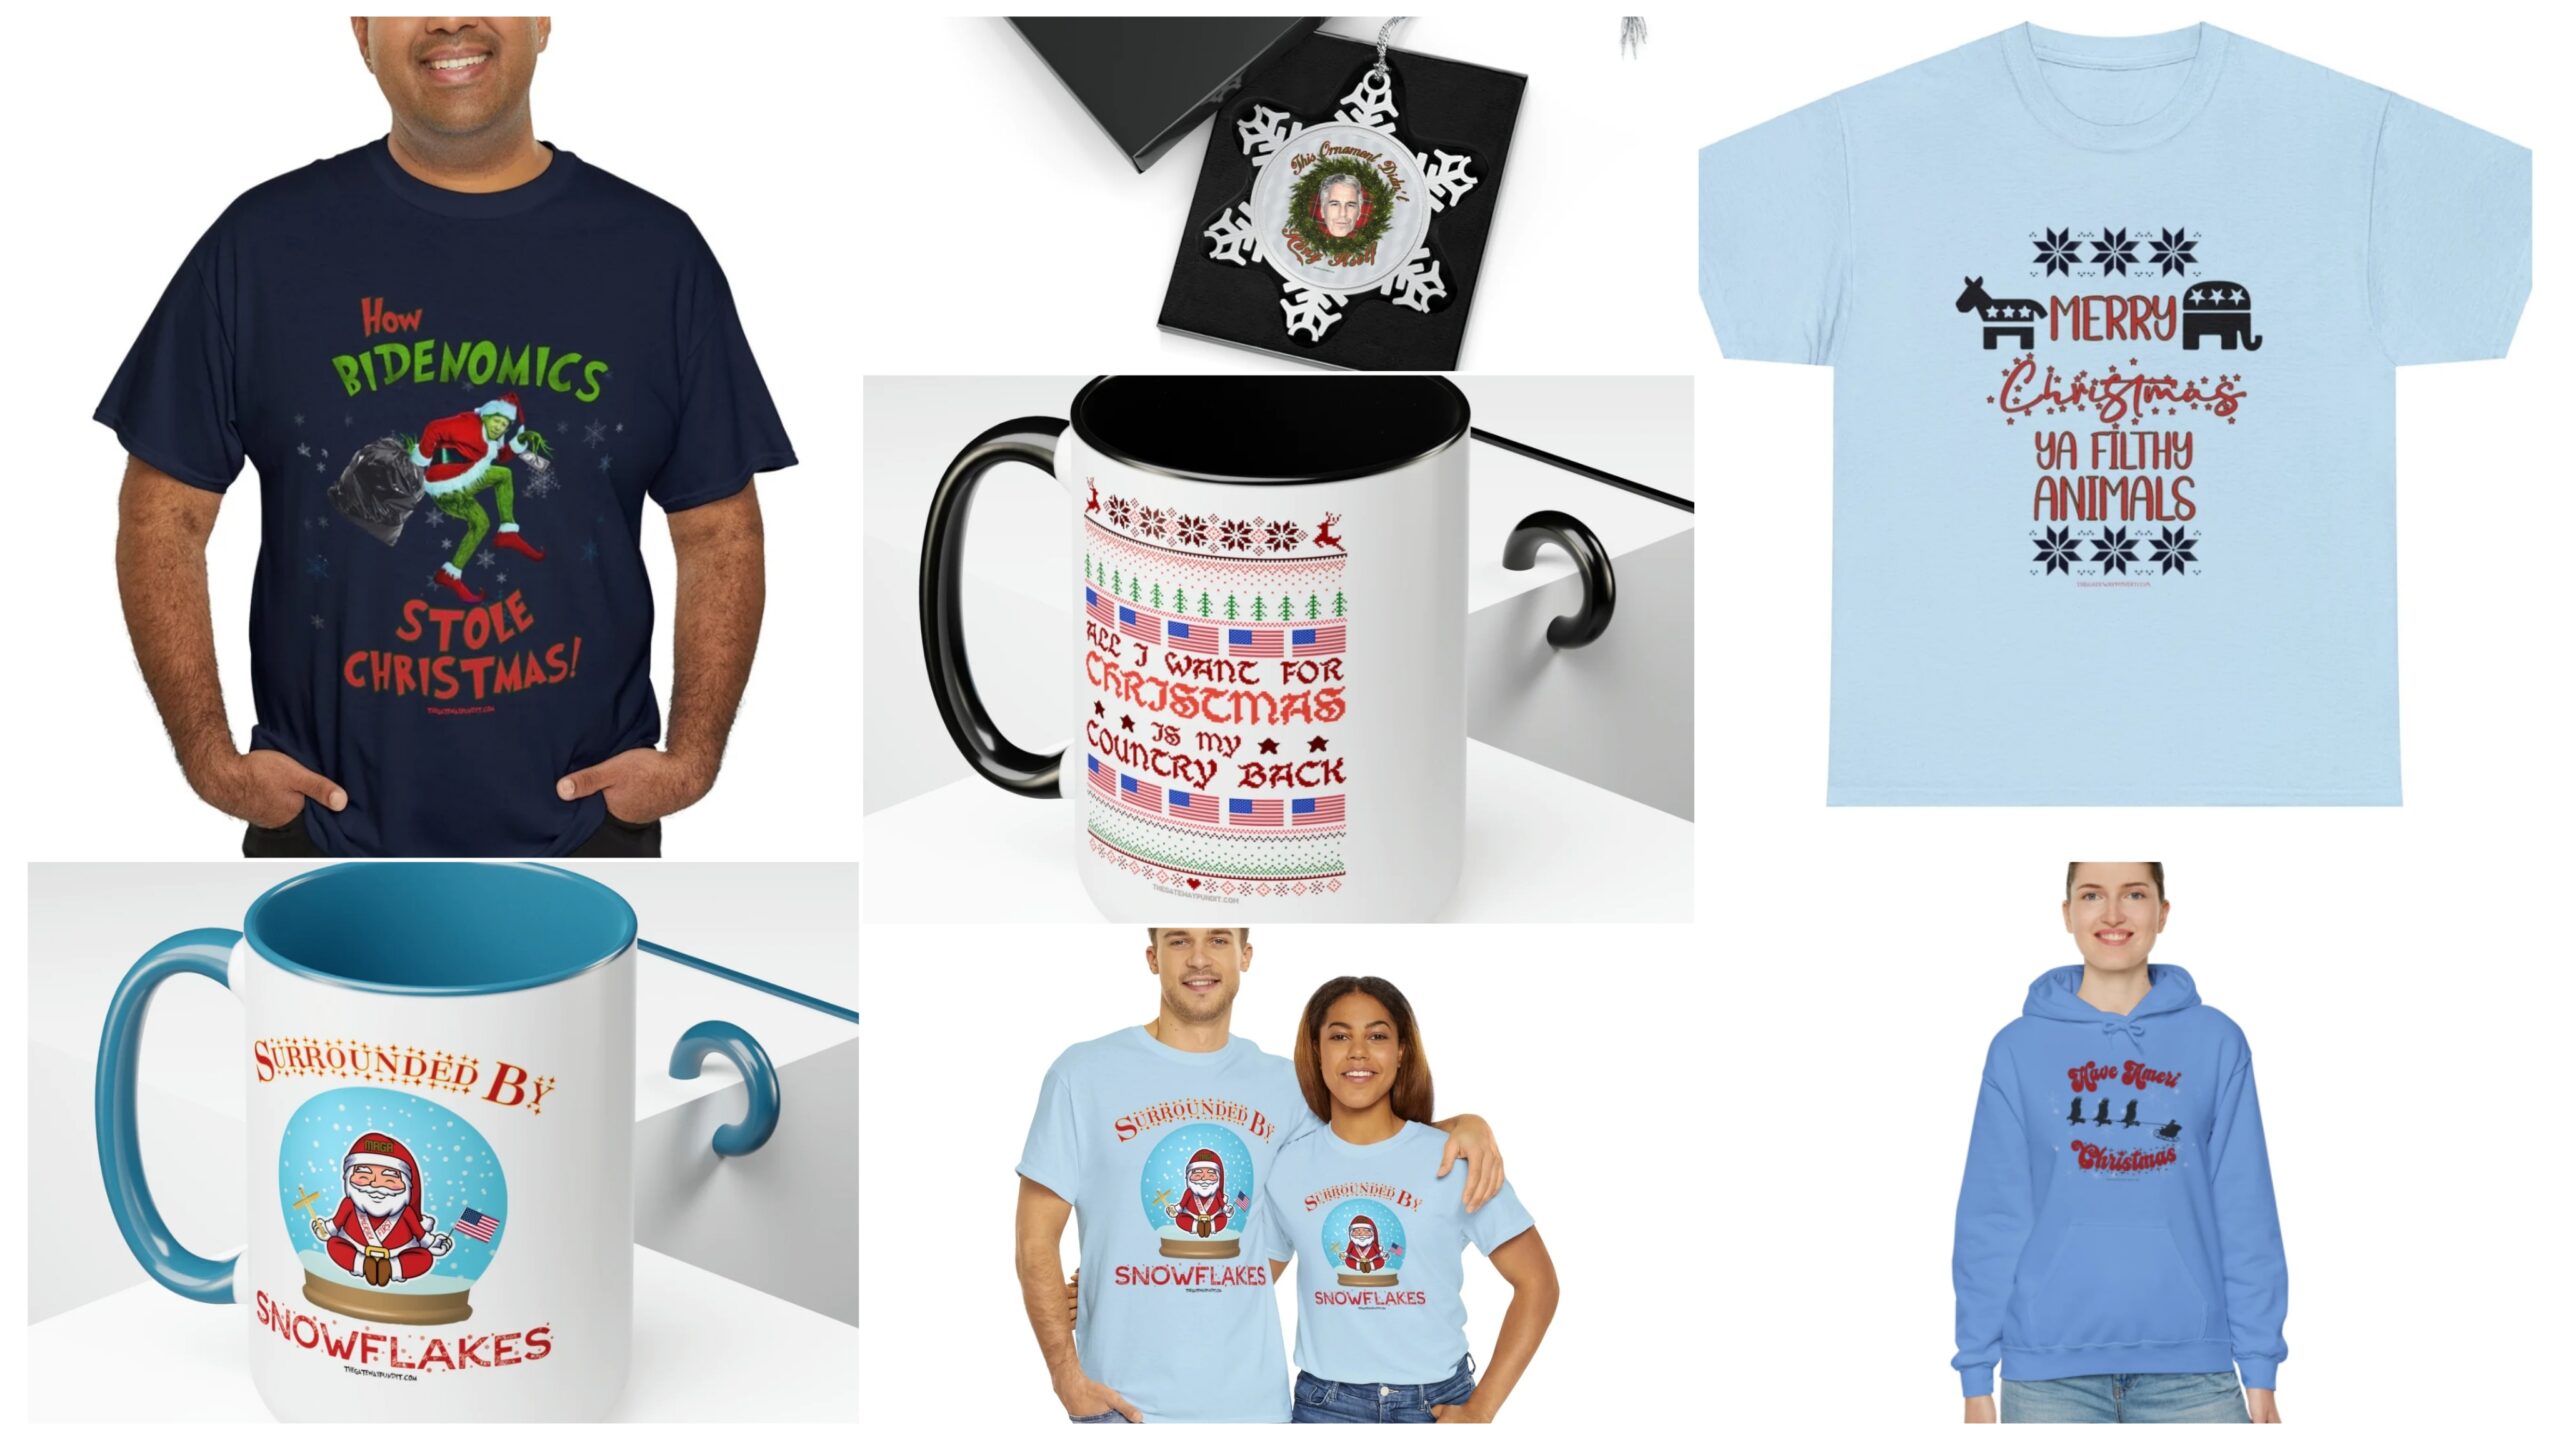 last-chance!-order-by-tomorrow-to-receive-tgp-store-holiday-collection-by-christmas!-use-code-‘ameri-christmas’-at-checkout!